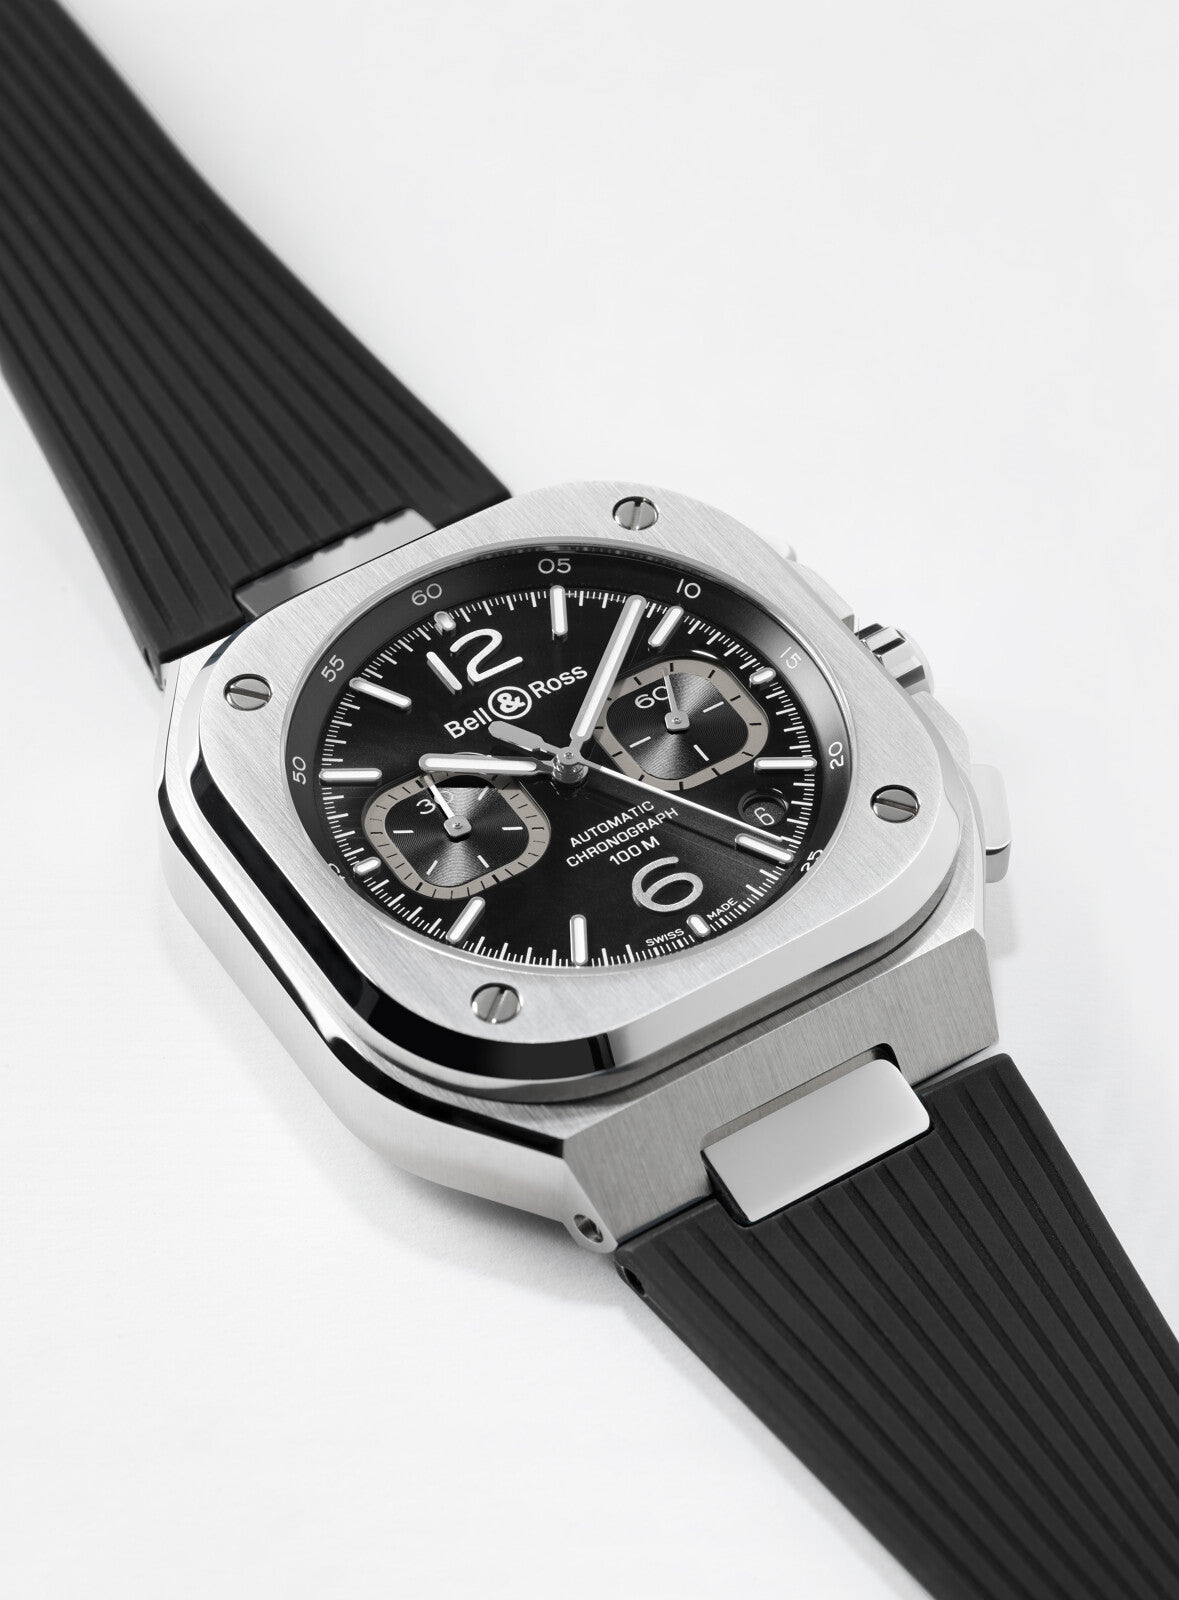 Bell & Ross BR 05 Chrono Black Steel Automatic Chronograph (Black Dial / 42mm)